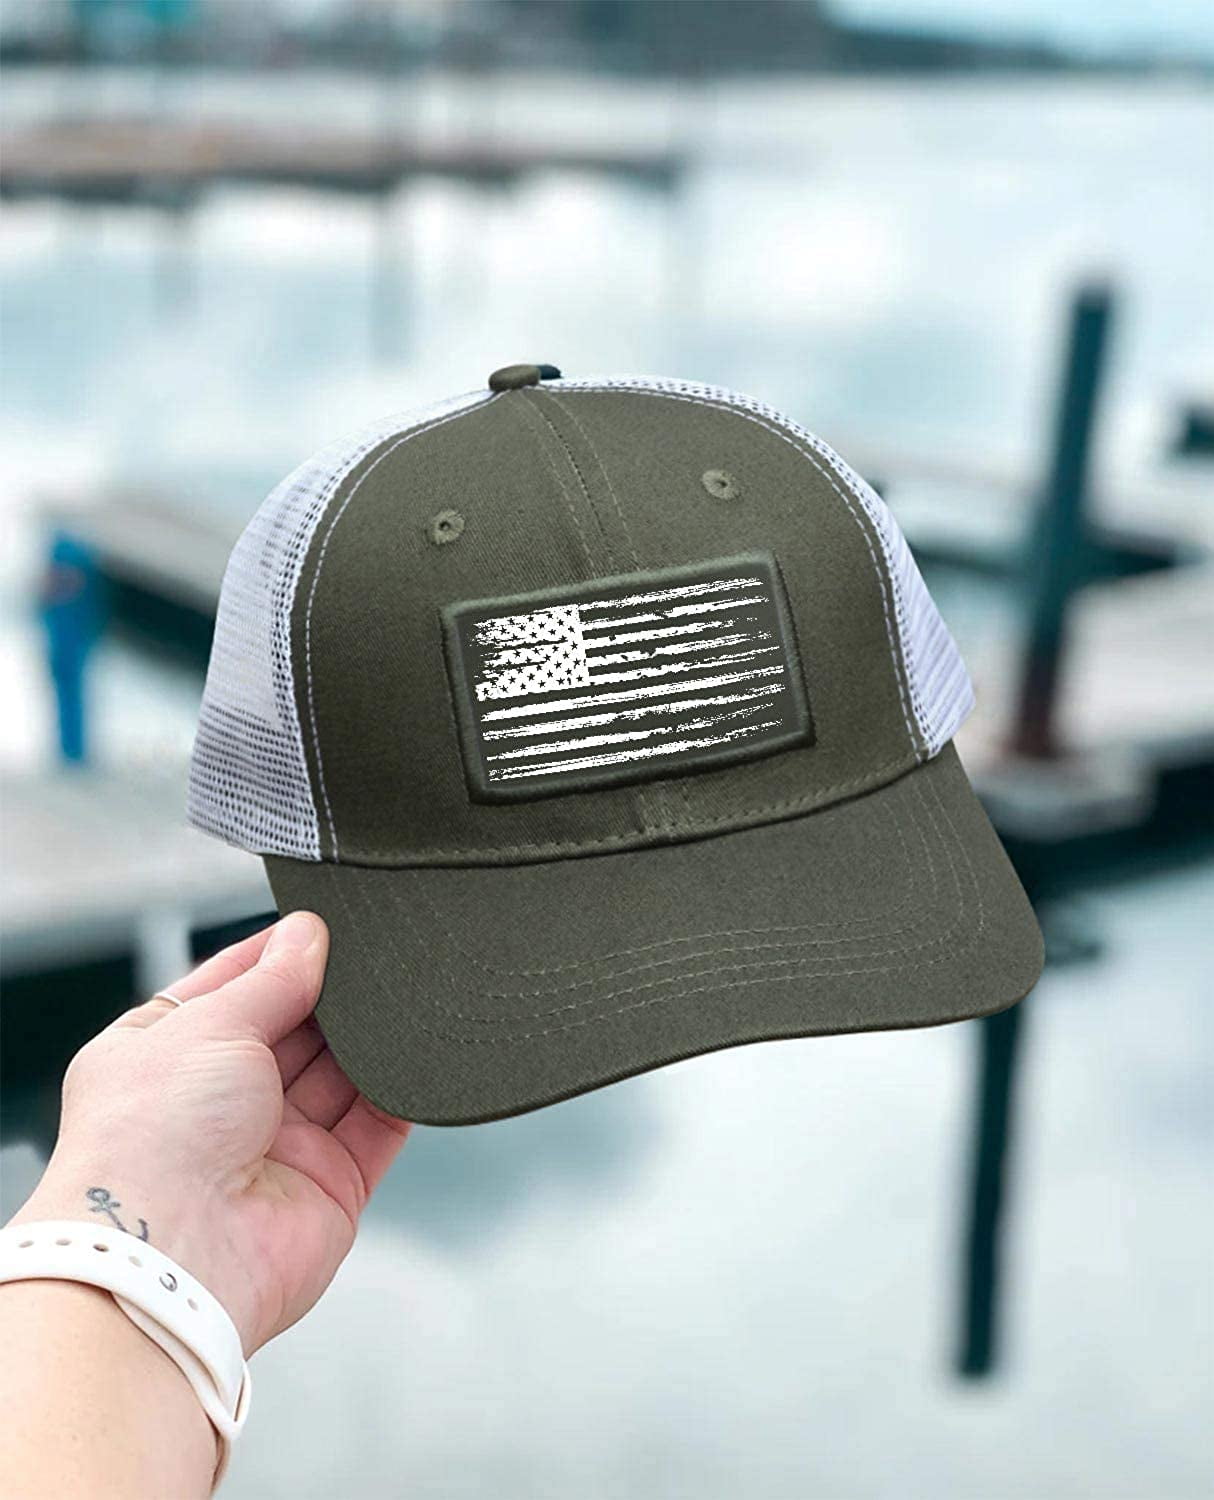 American Fish Flag Trucker Hats - Fishing Gifts for Men - Outdoor